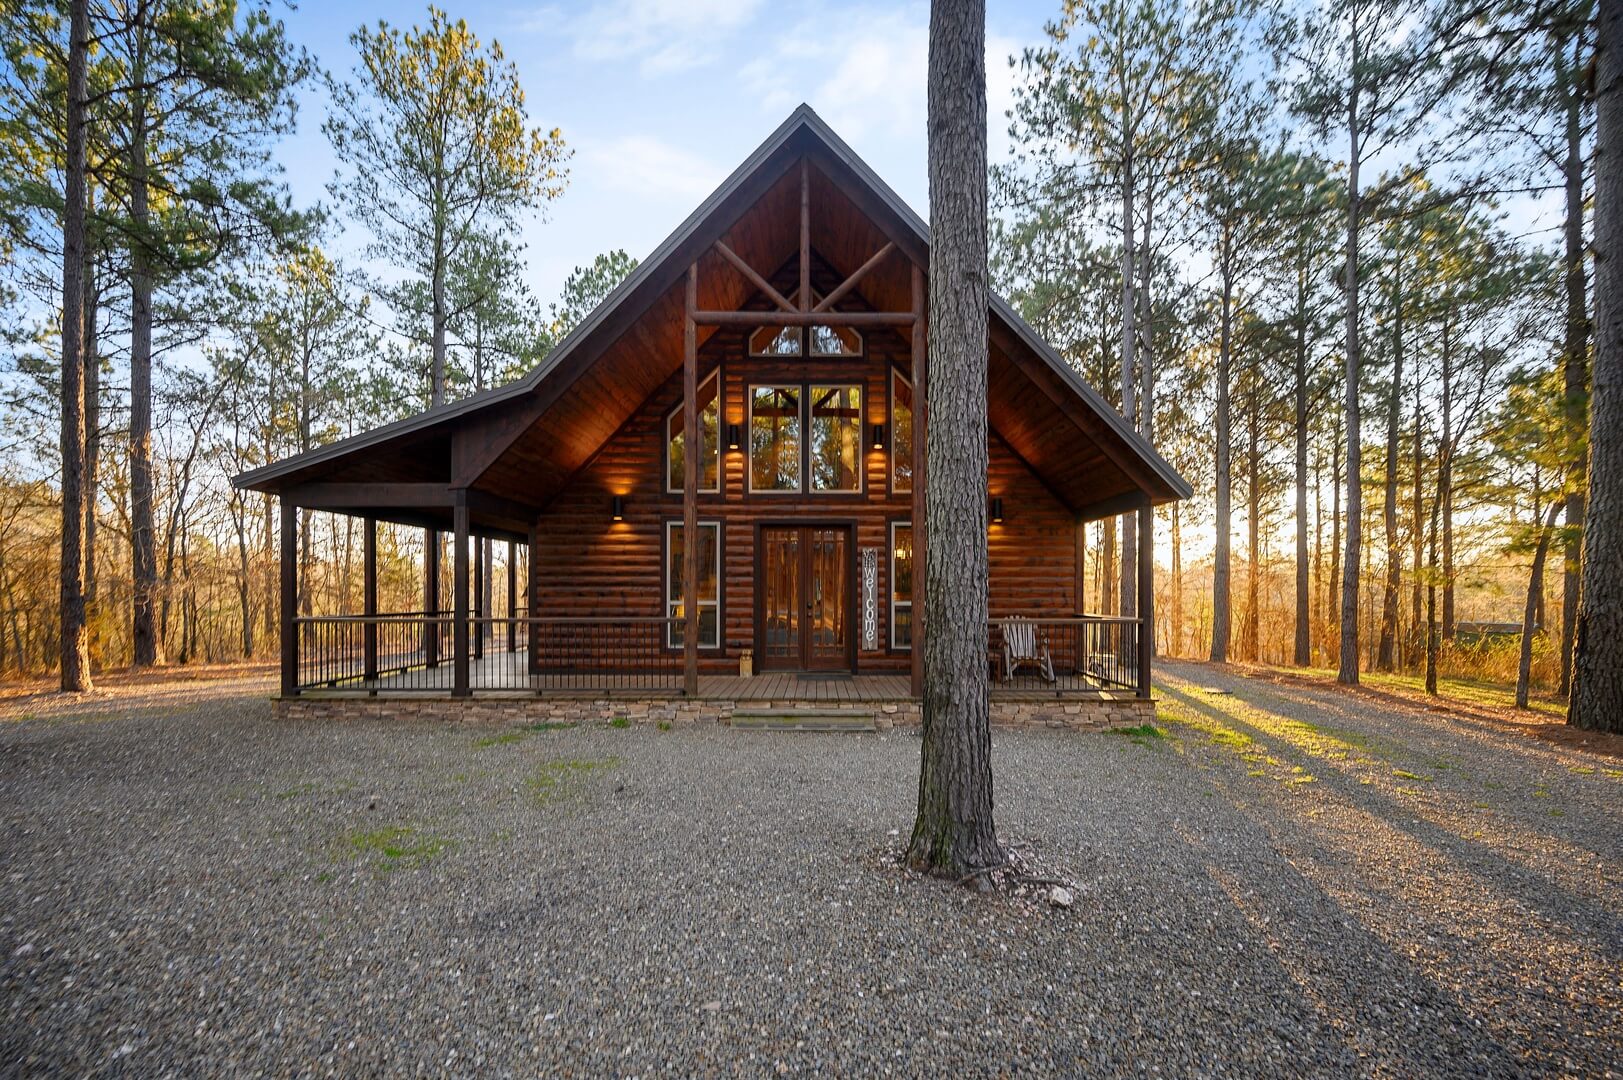 The exterior of a cabin rental, one of the places to stay in Broken Bow, OK.